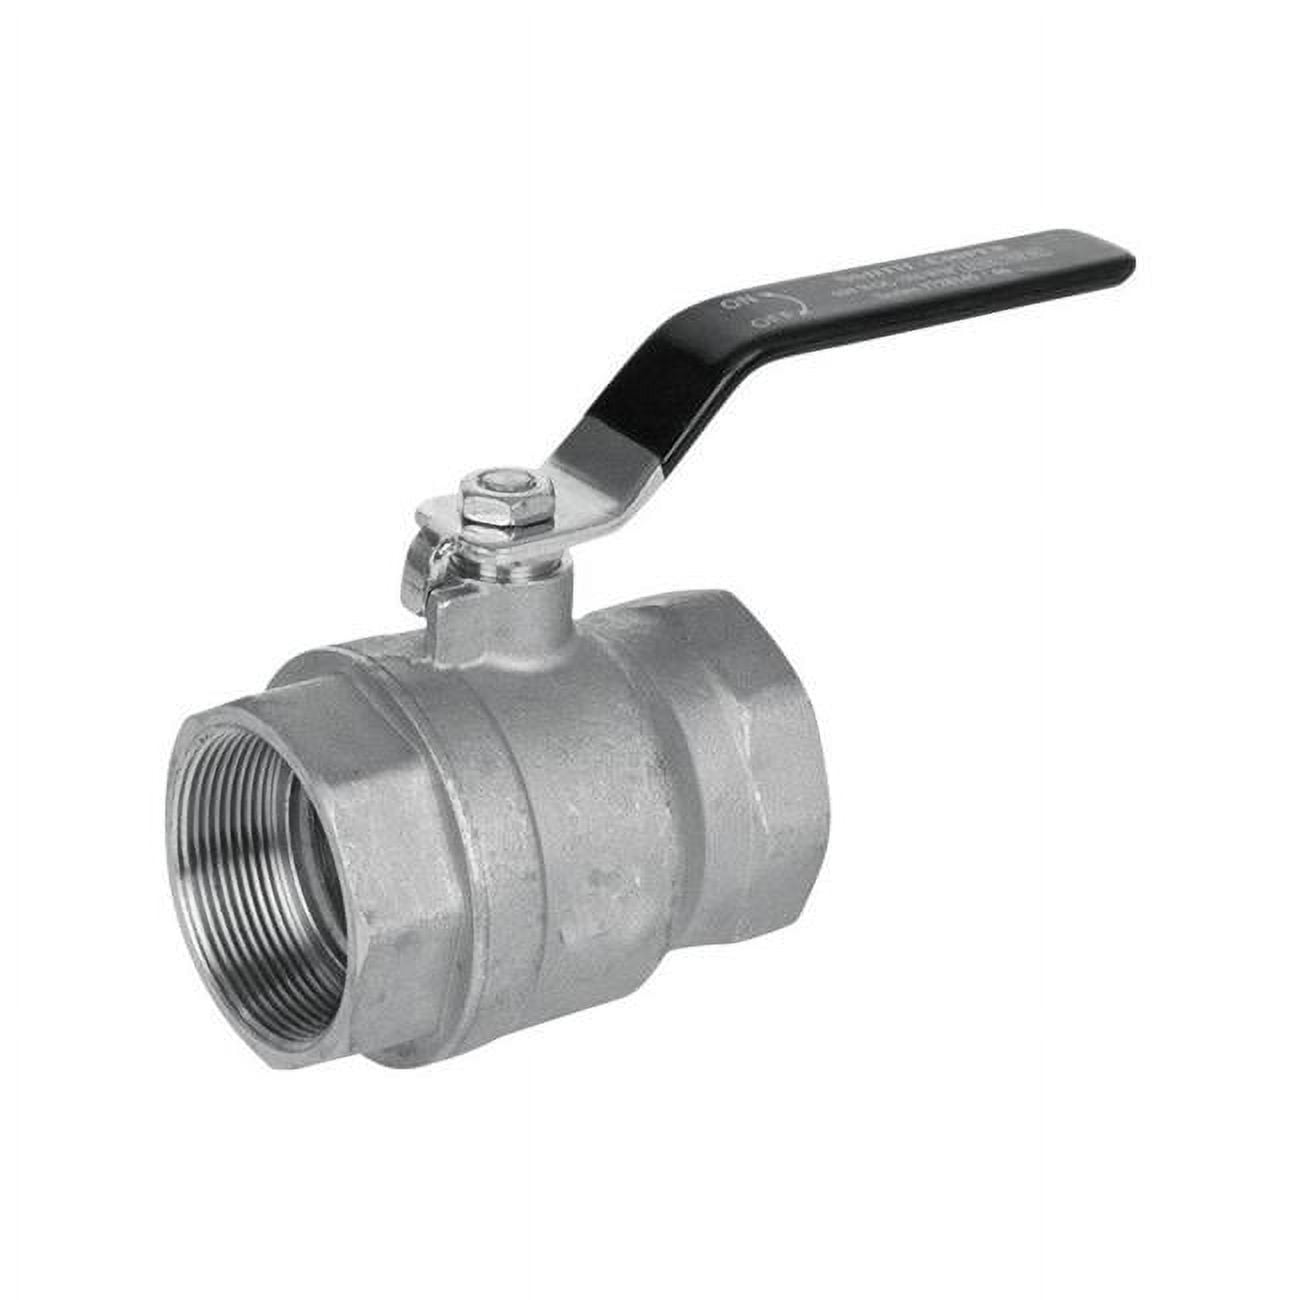 4868584 1 In. Dia. International Fip Iron Pipe Size Thread Ball Valve, Stainless Steel - 2 Piece